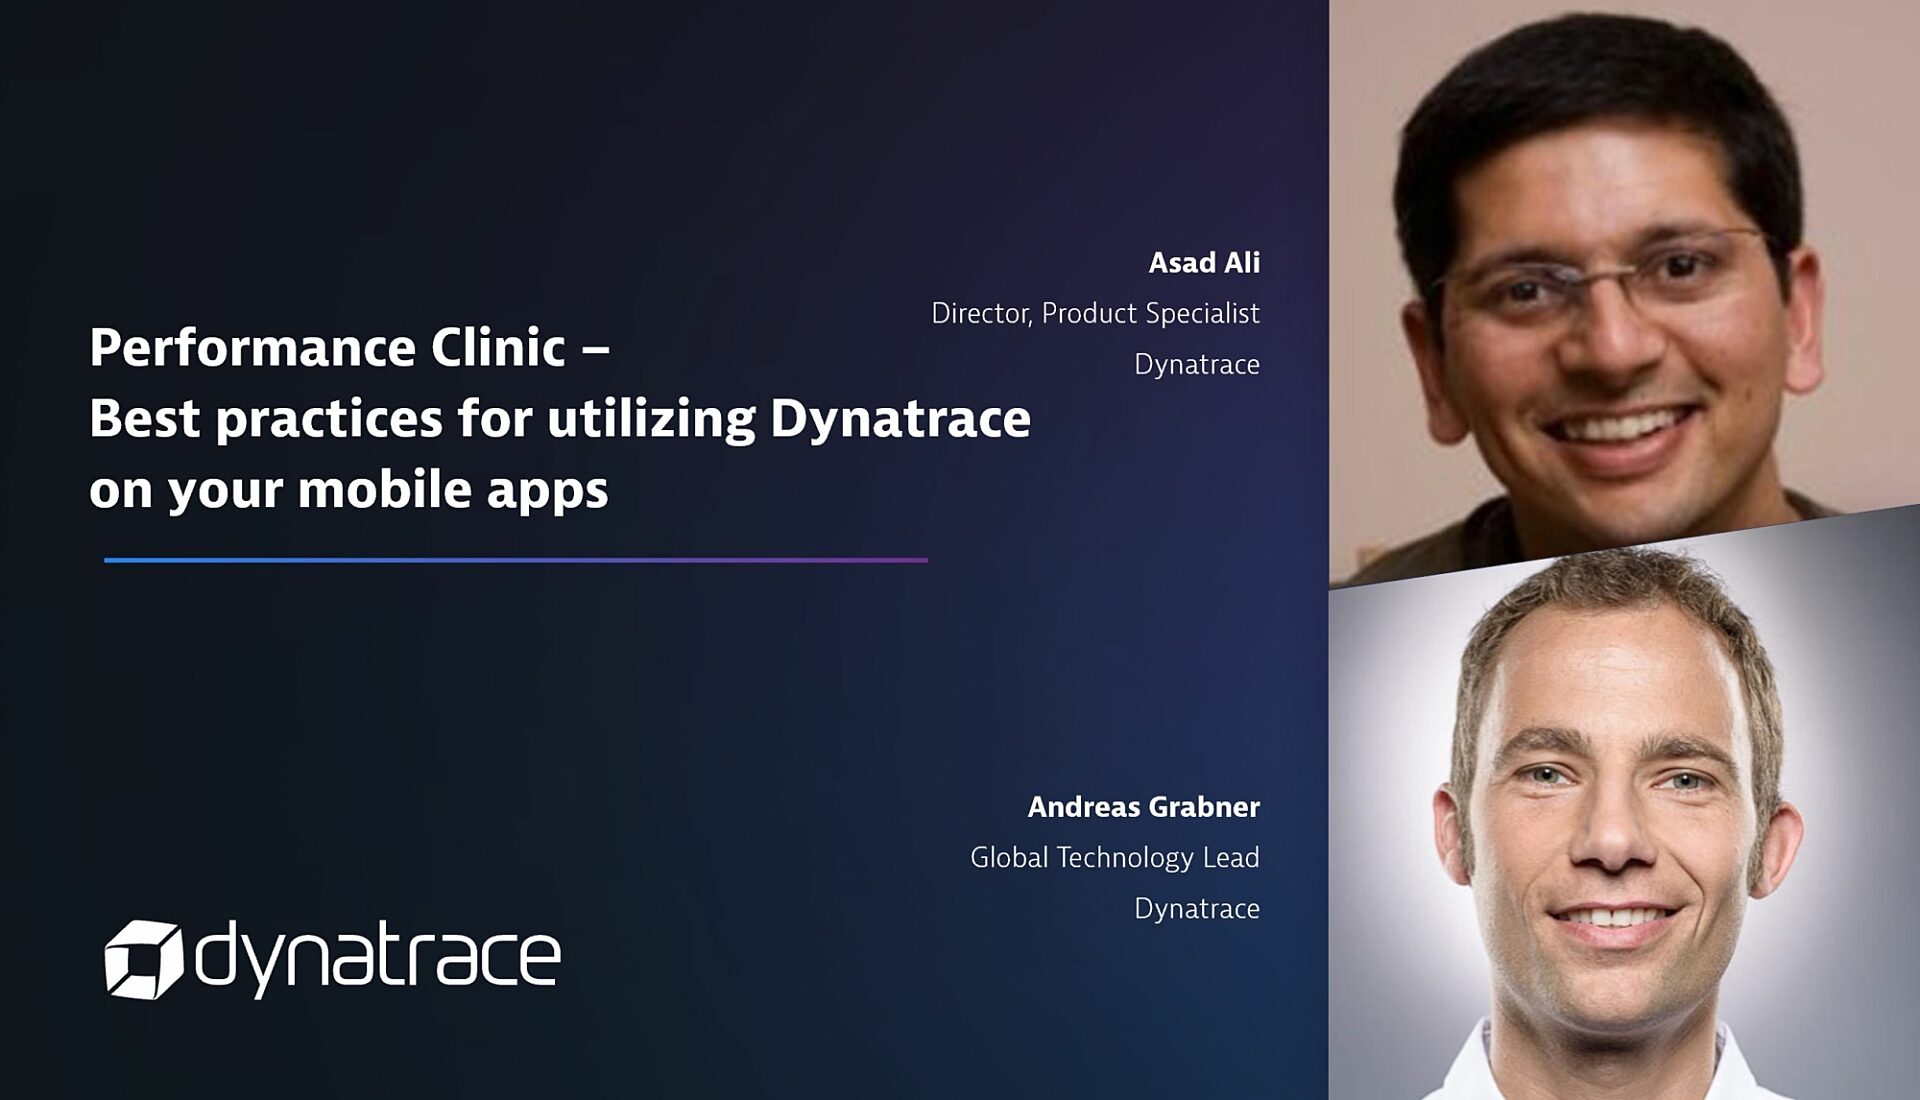 Performance clinic utilizing dynatrace mobile apps